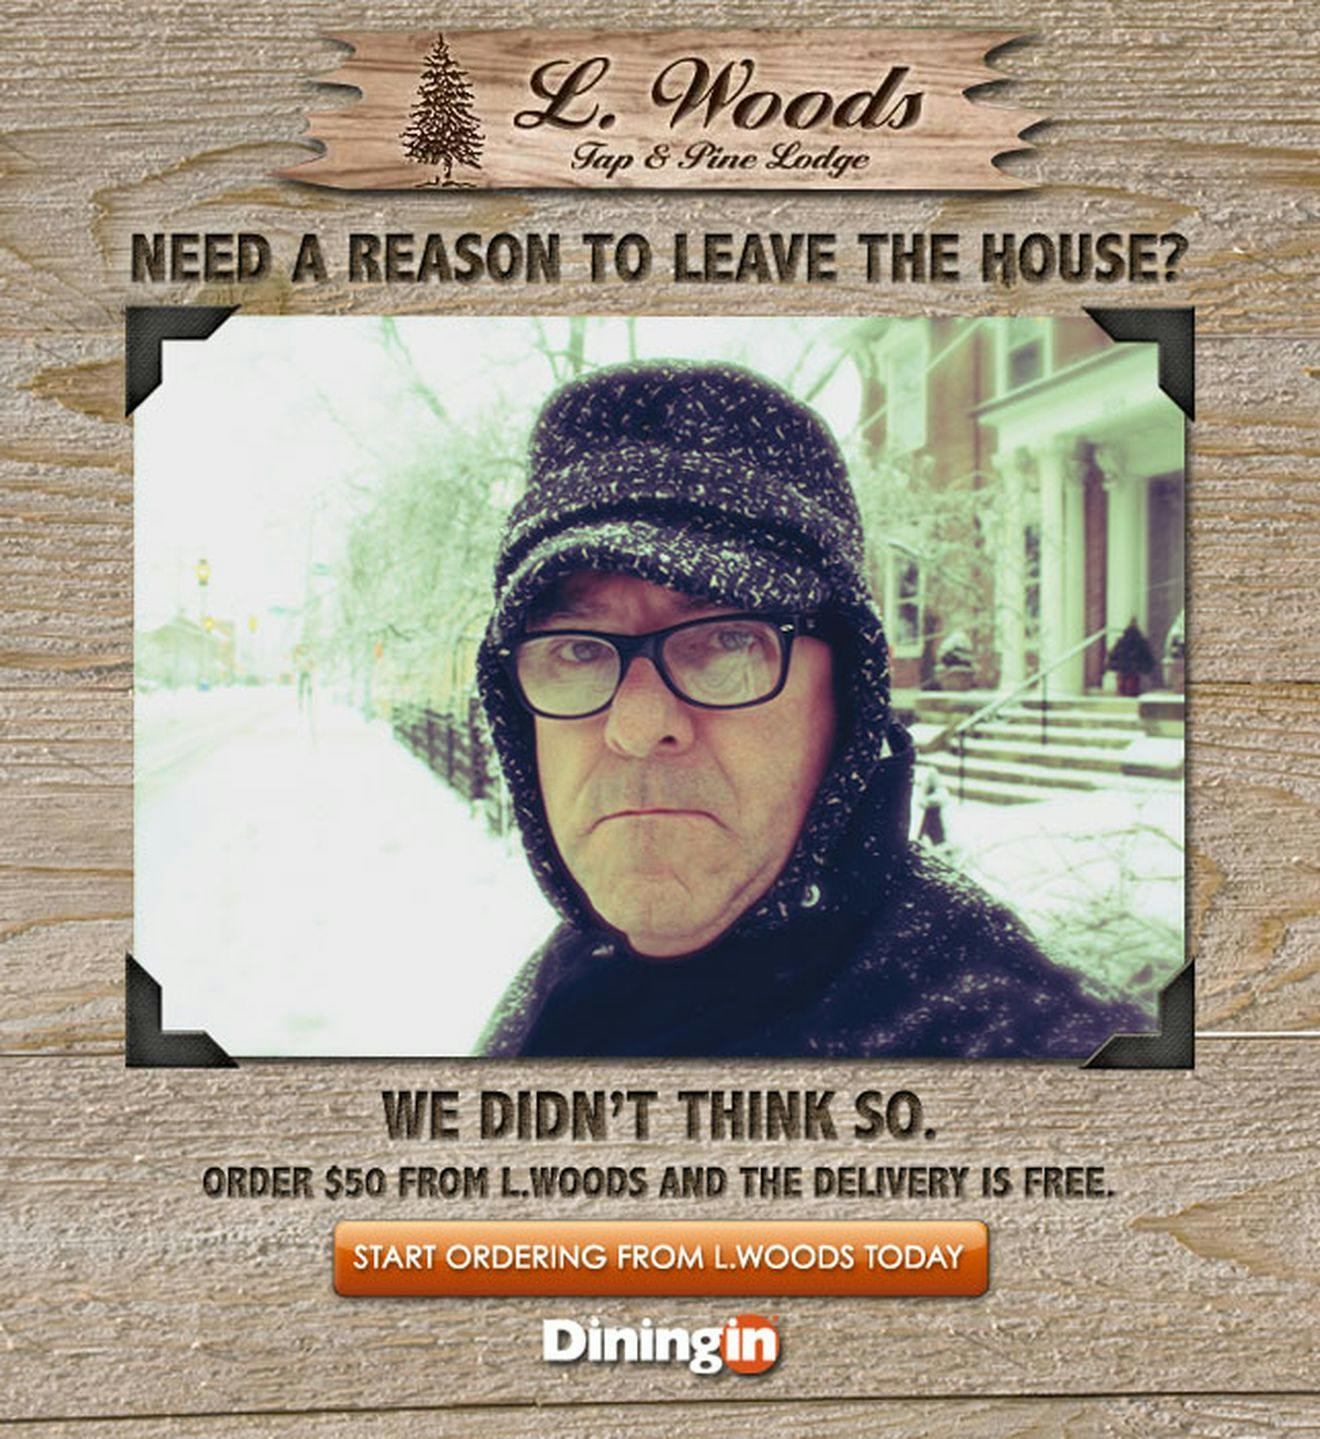 An example email campaign I created targeting Chicago residents during the cold winter period